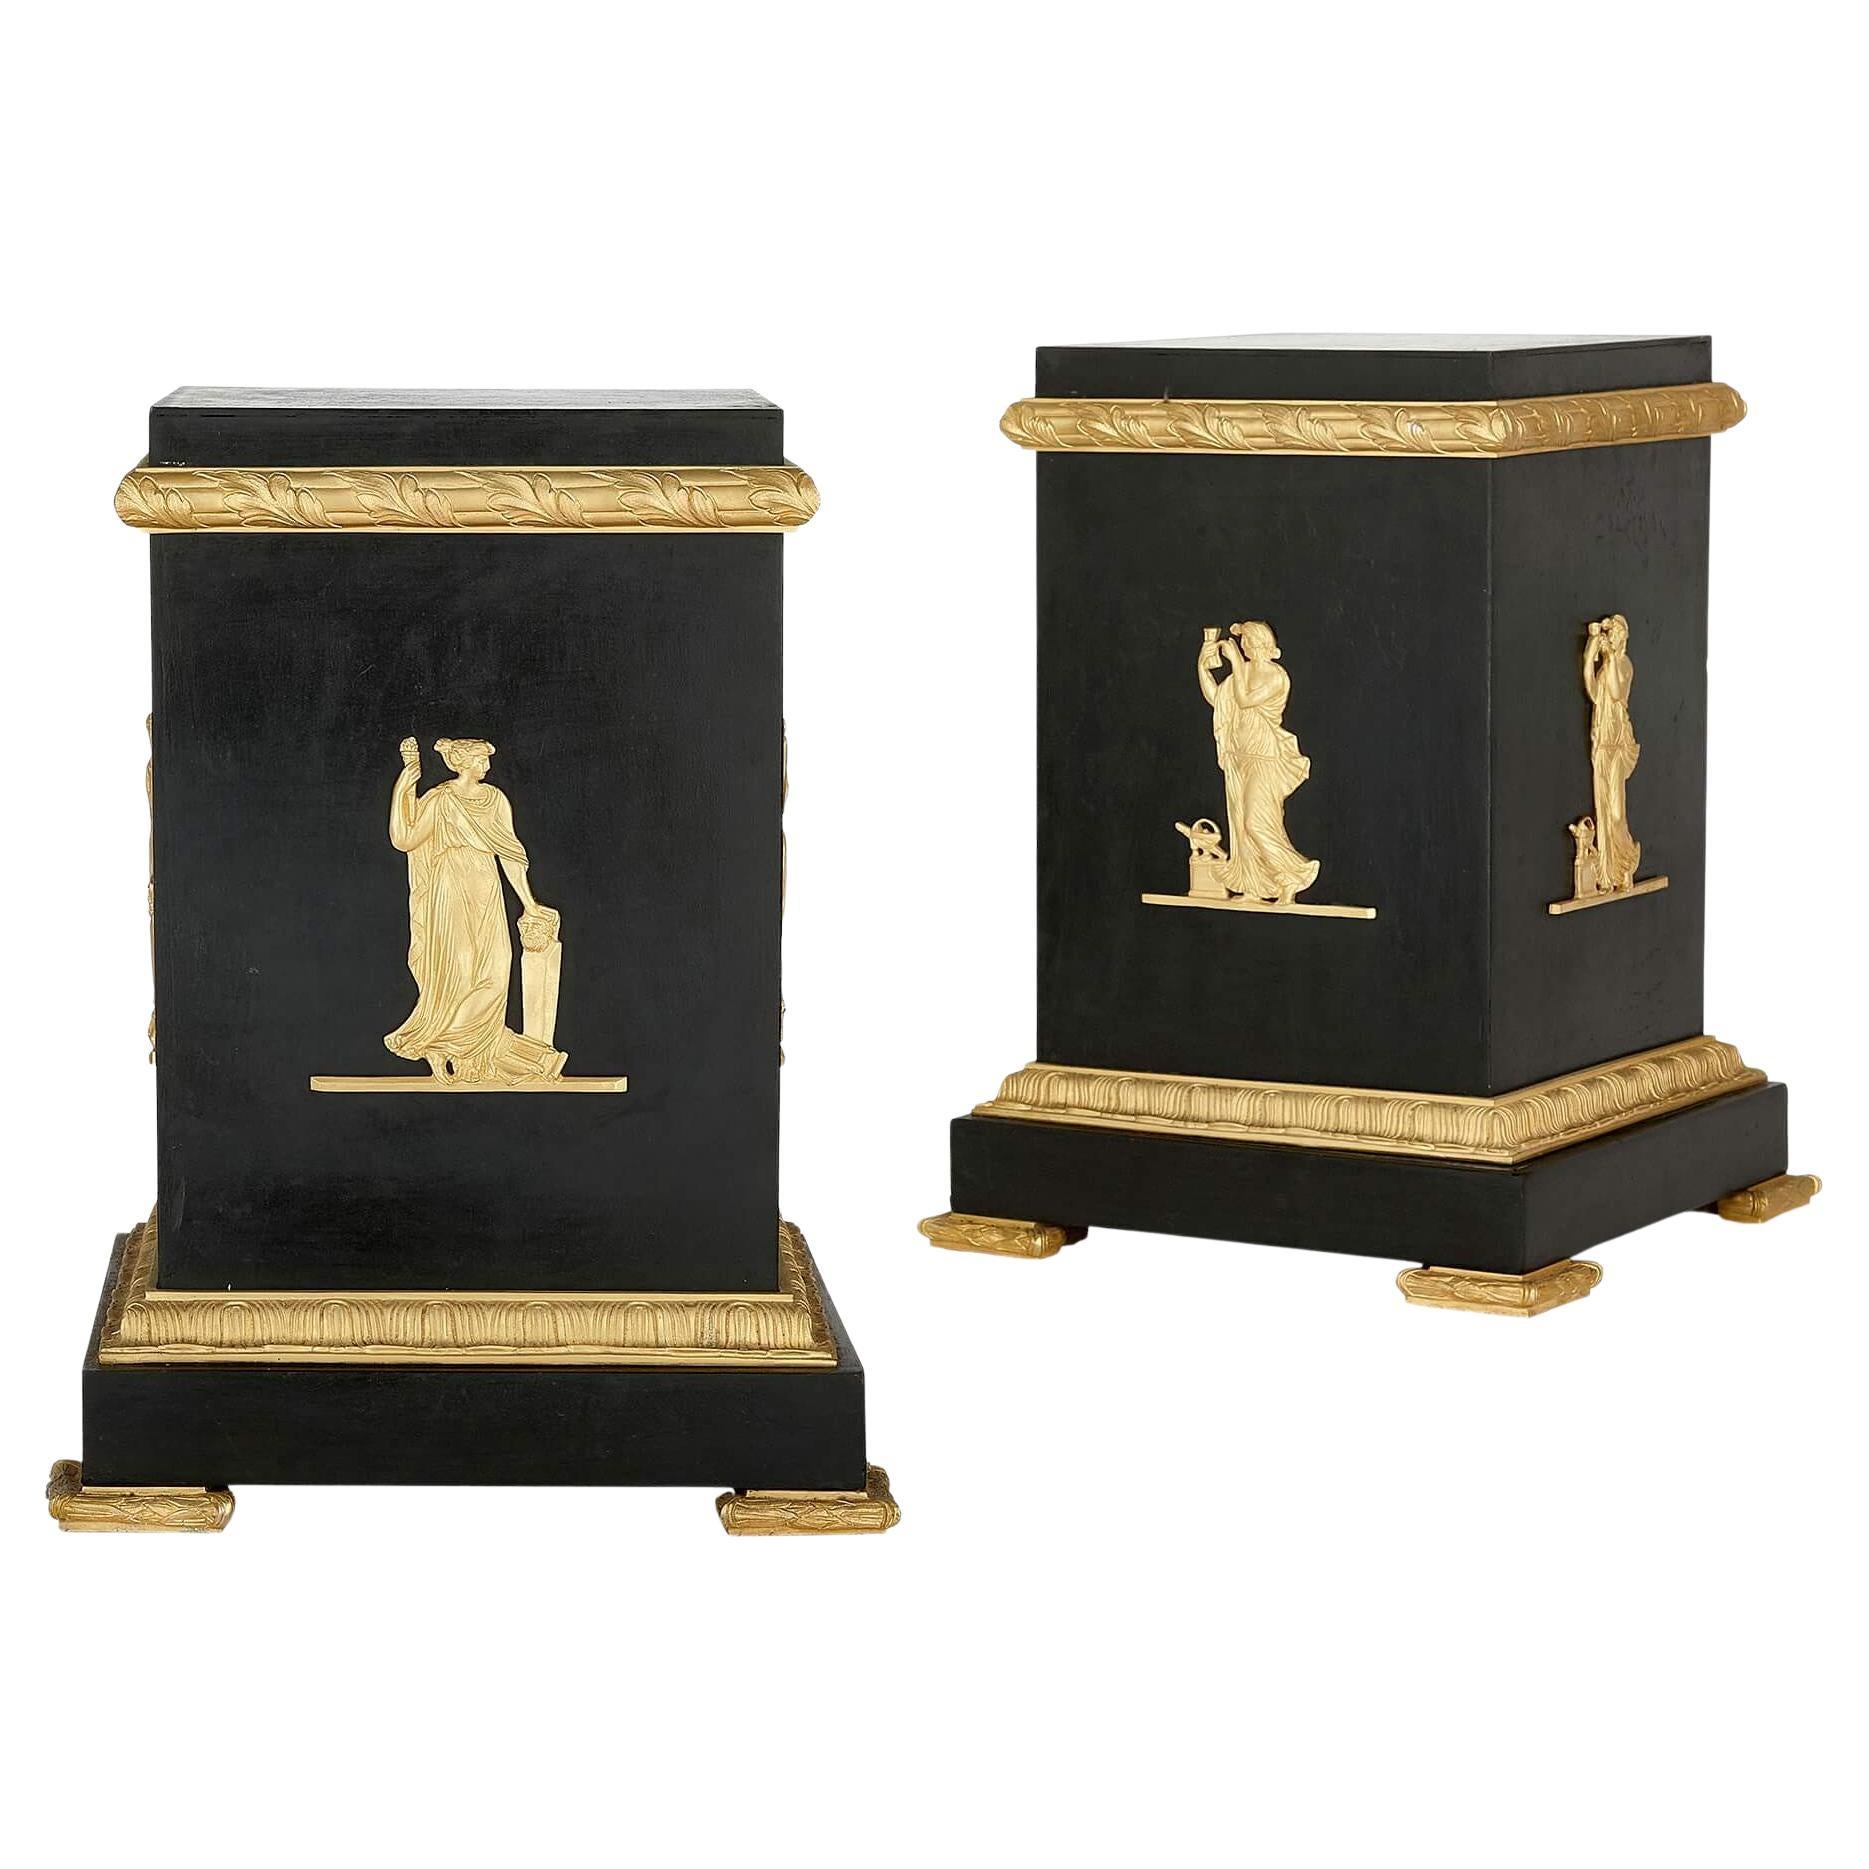 Pair of Empire-Style Neoclassical Gilt and Patinated Bronze Stands